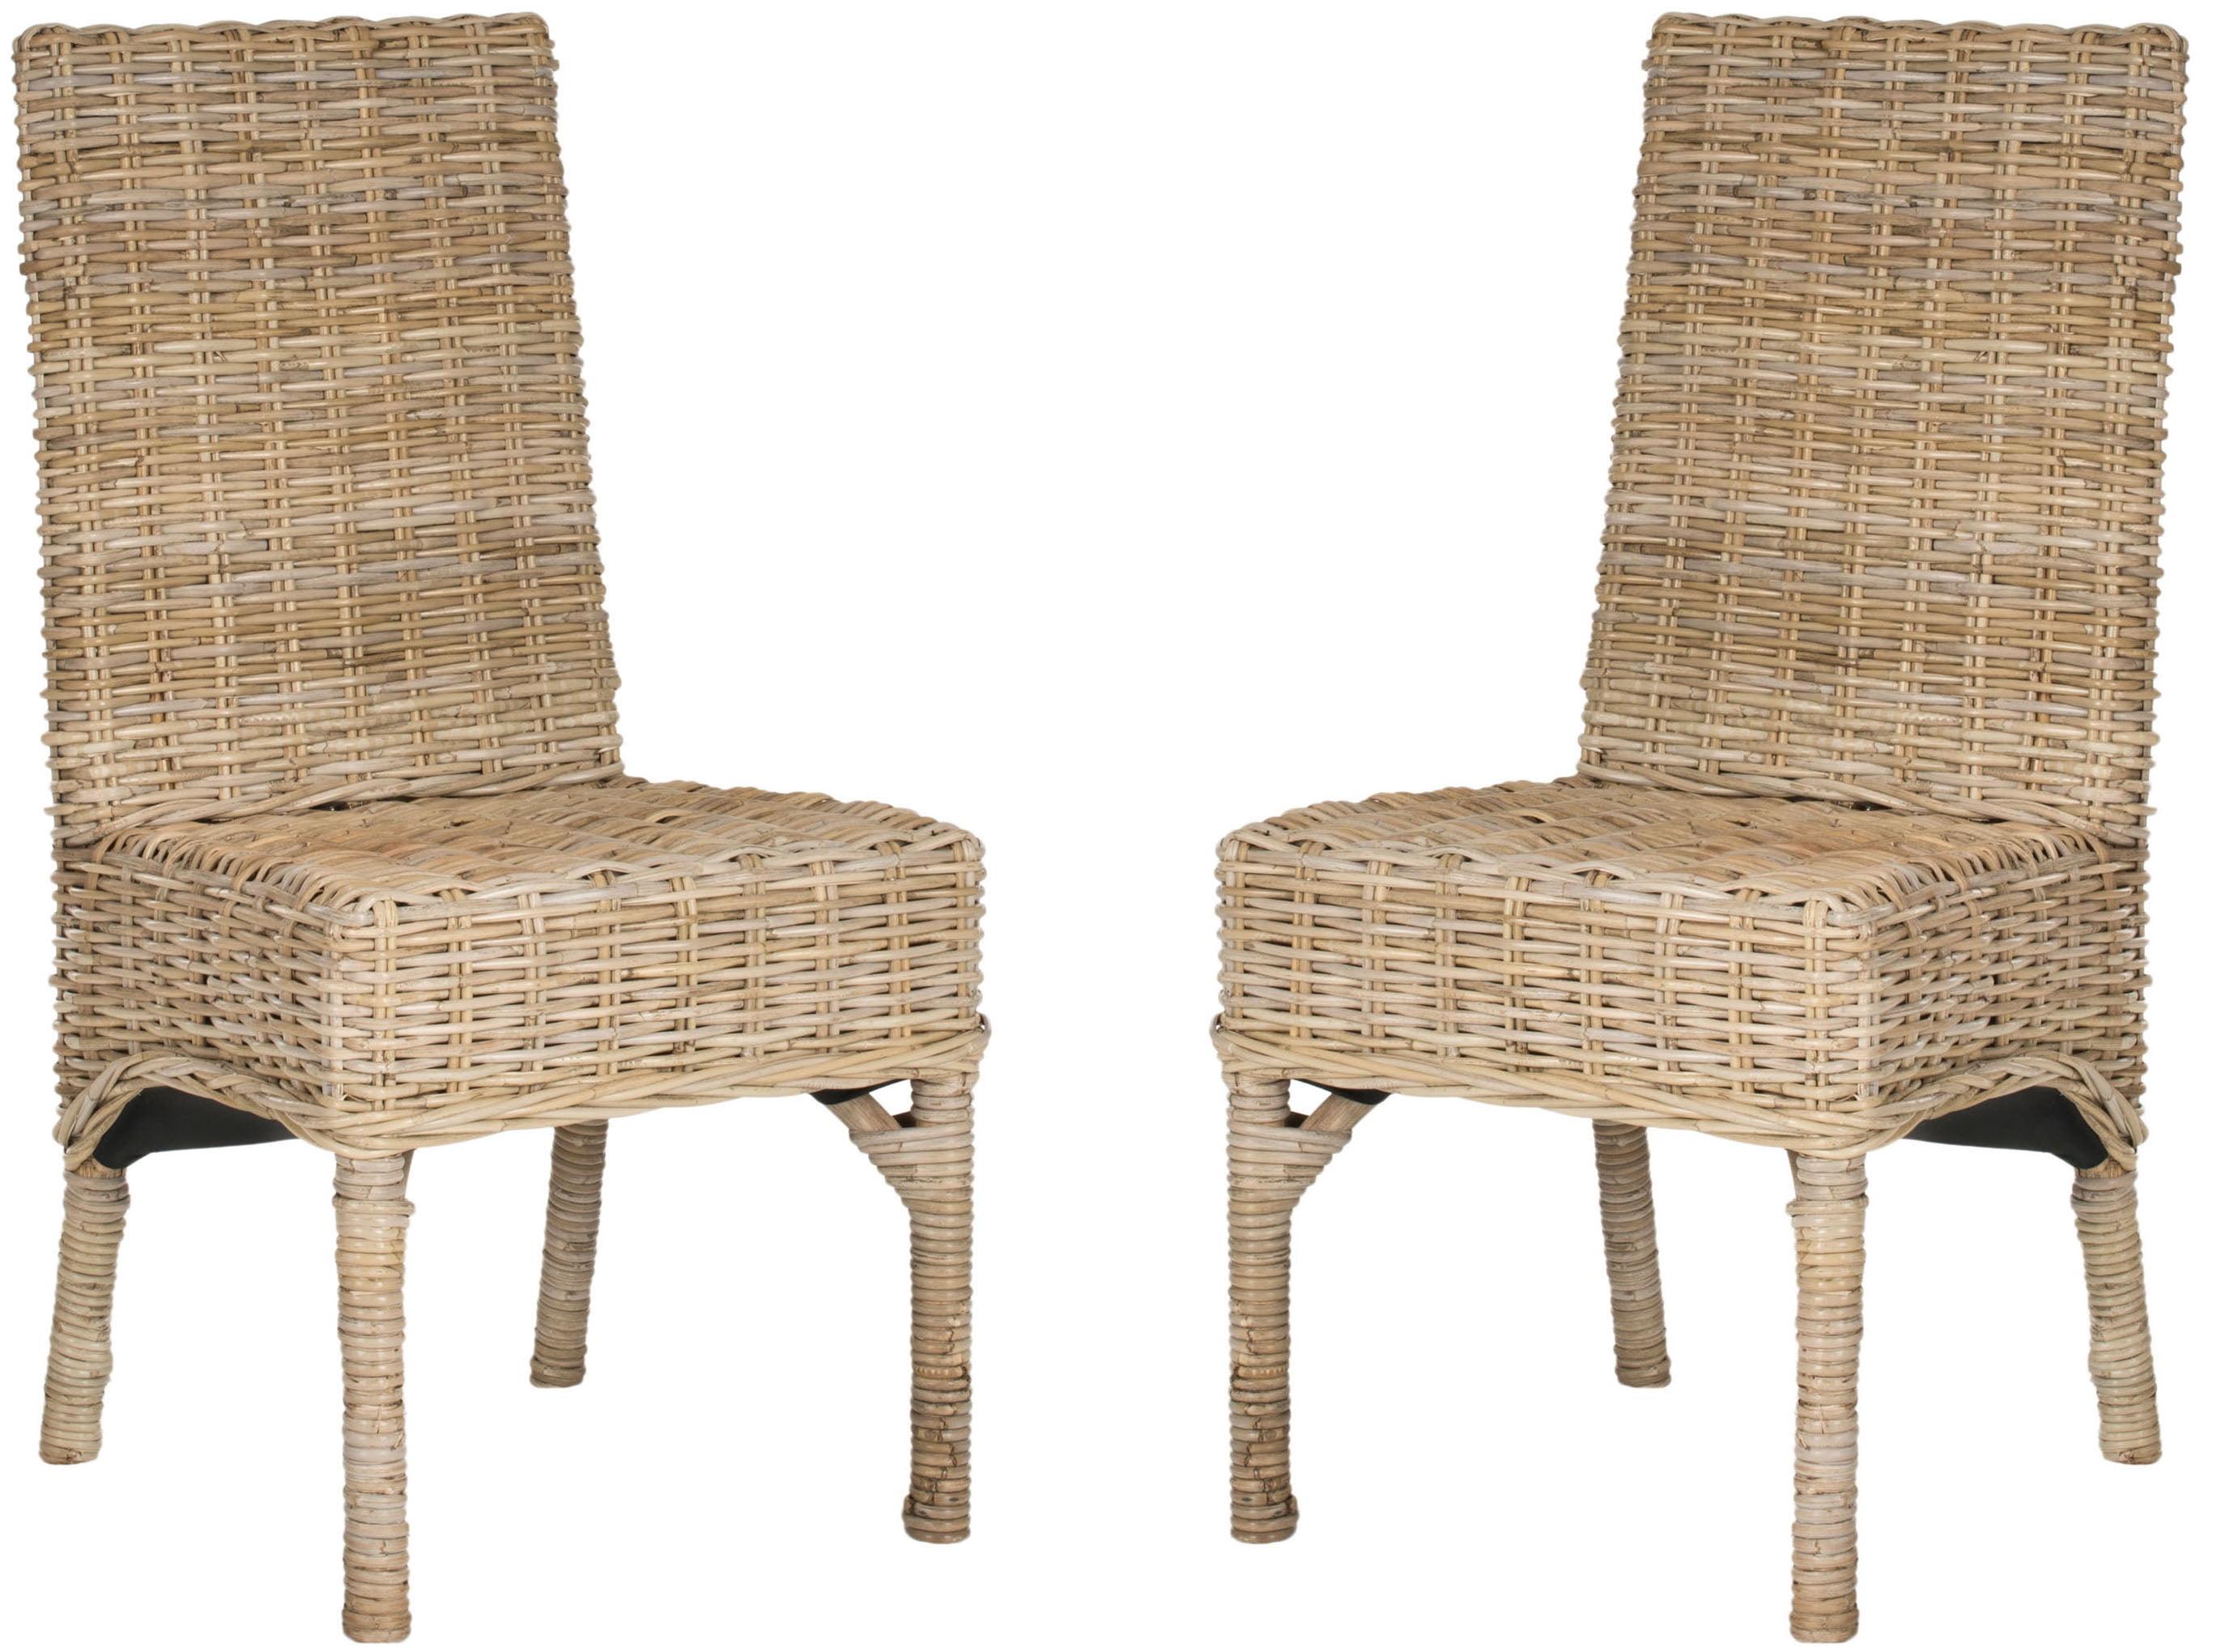 Transitional Unfinished Wicker and Wood Side Chair - Natural